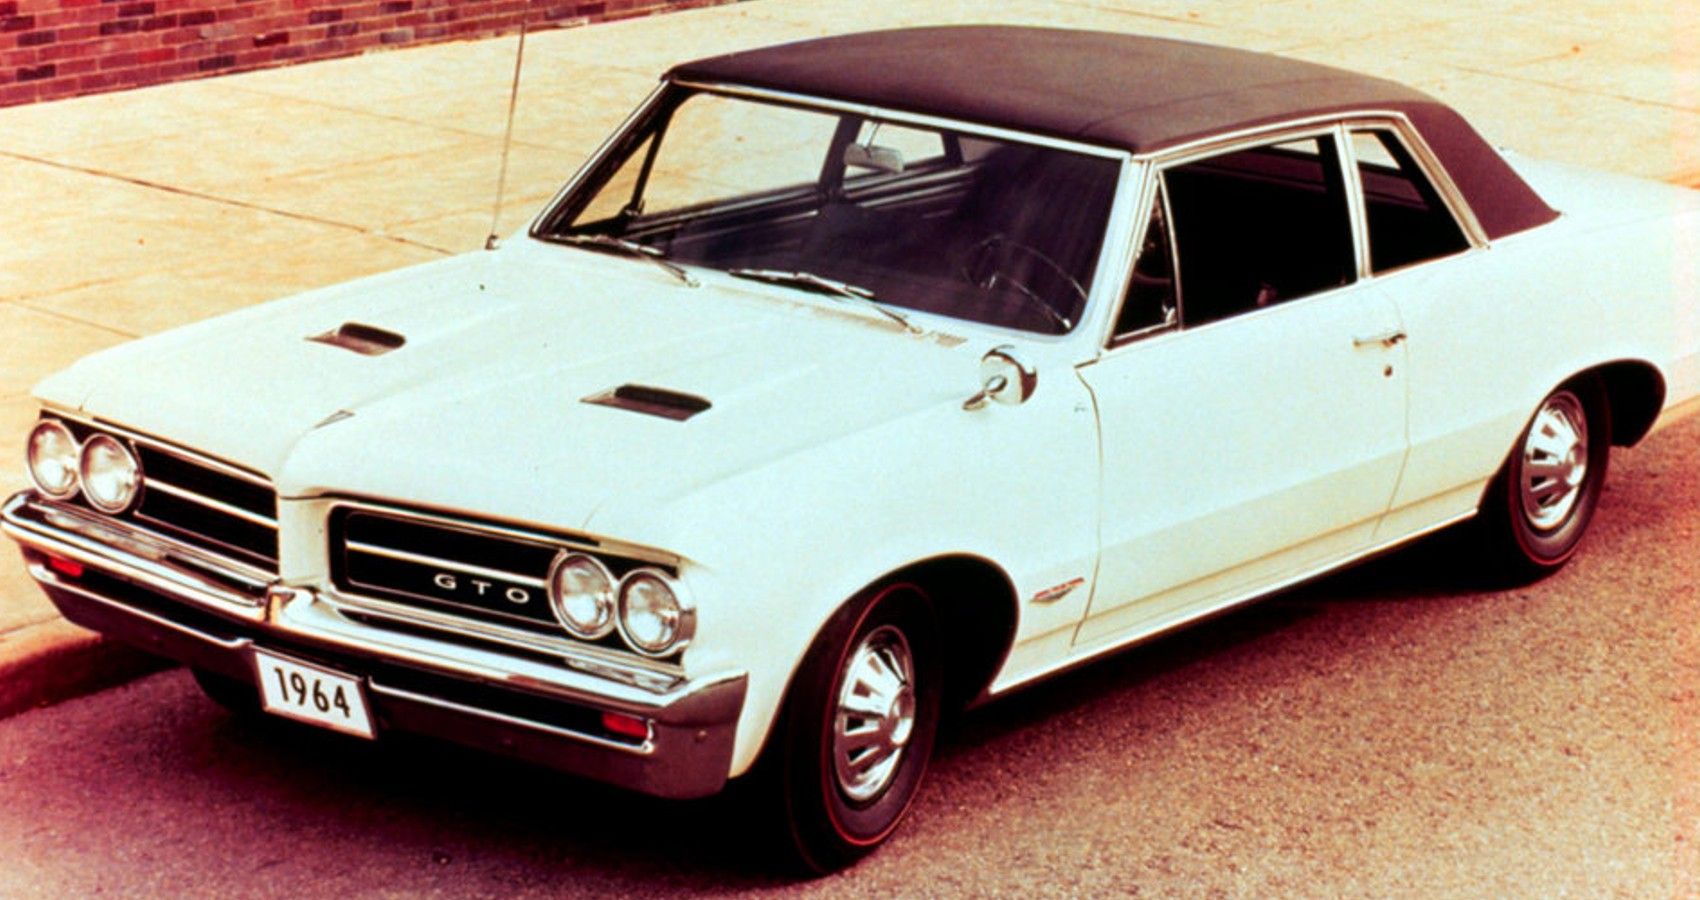 Why We Think The 1964 Pontiac GTO Was The Best Muscle Car Ever Made